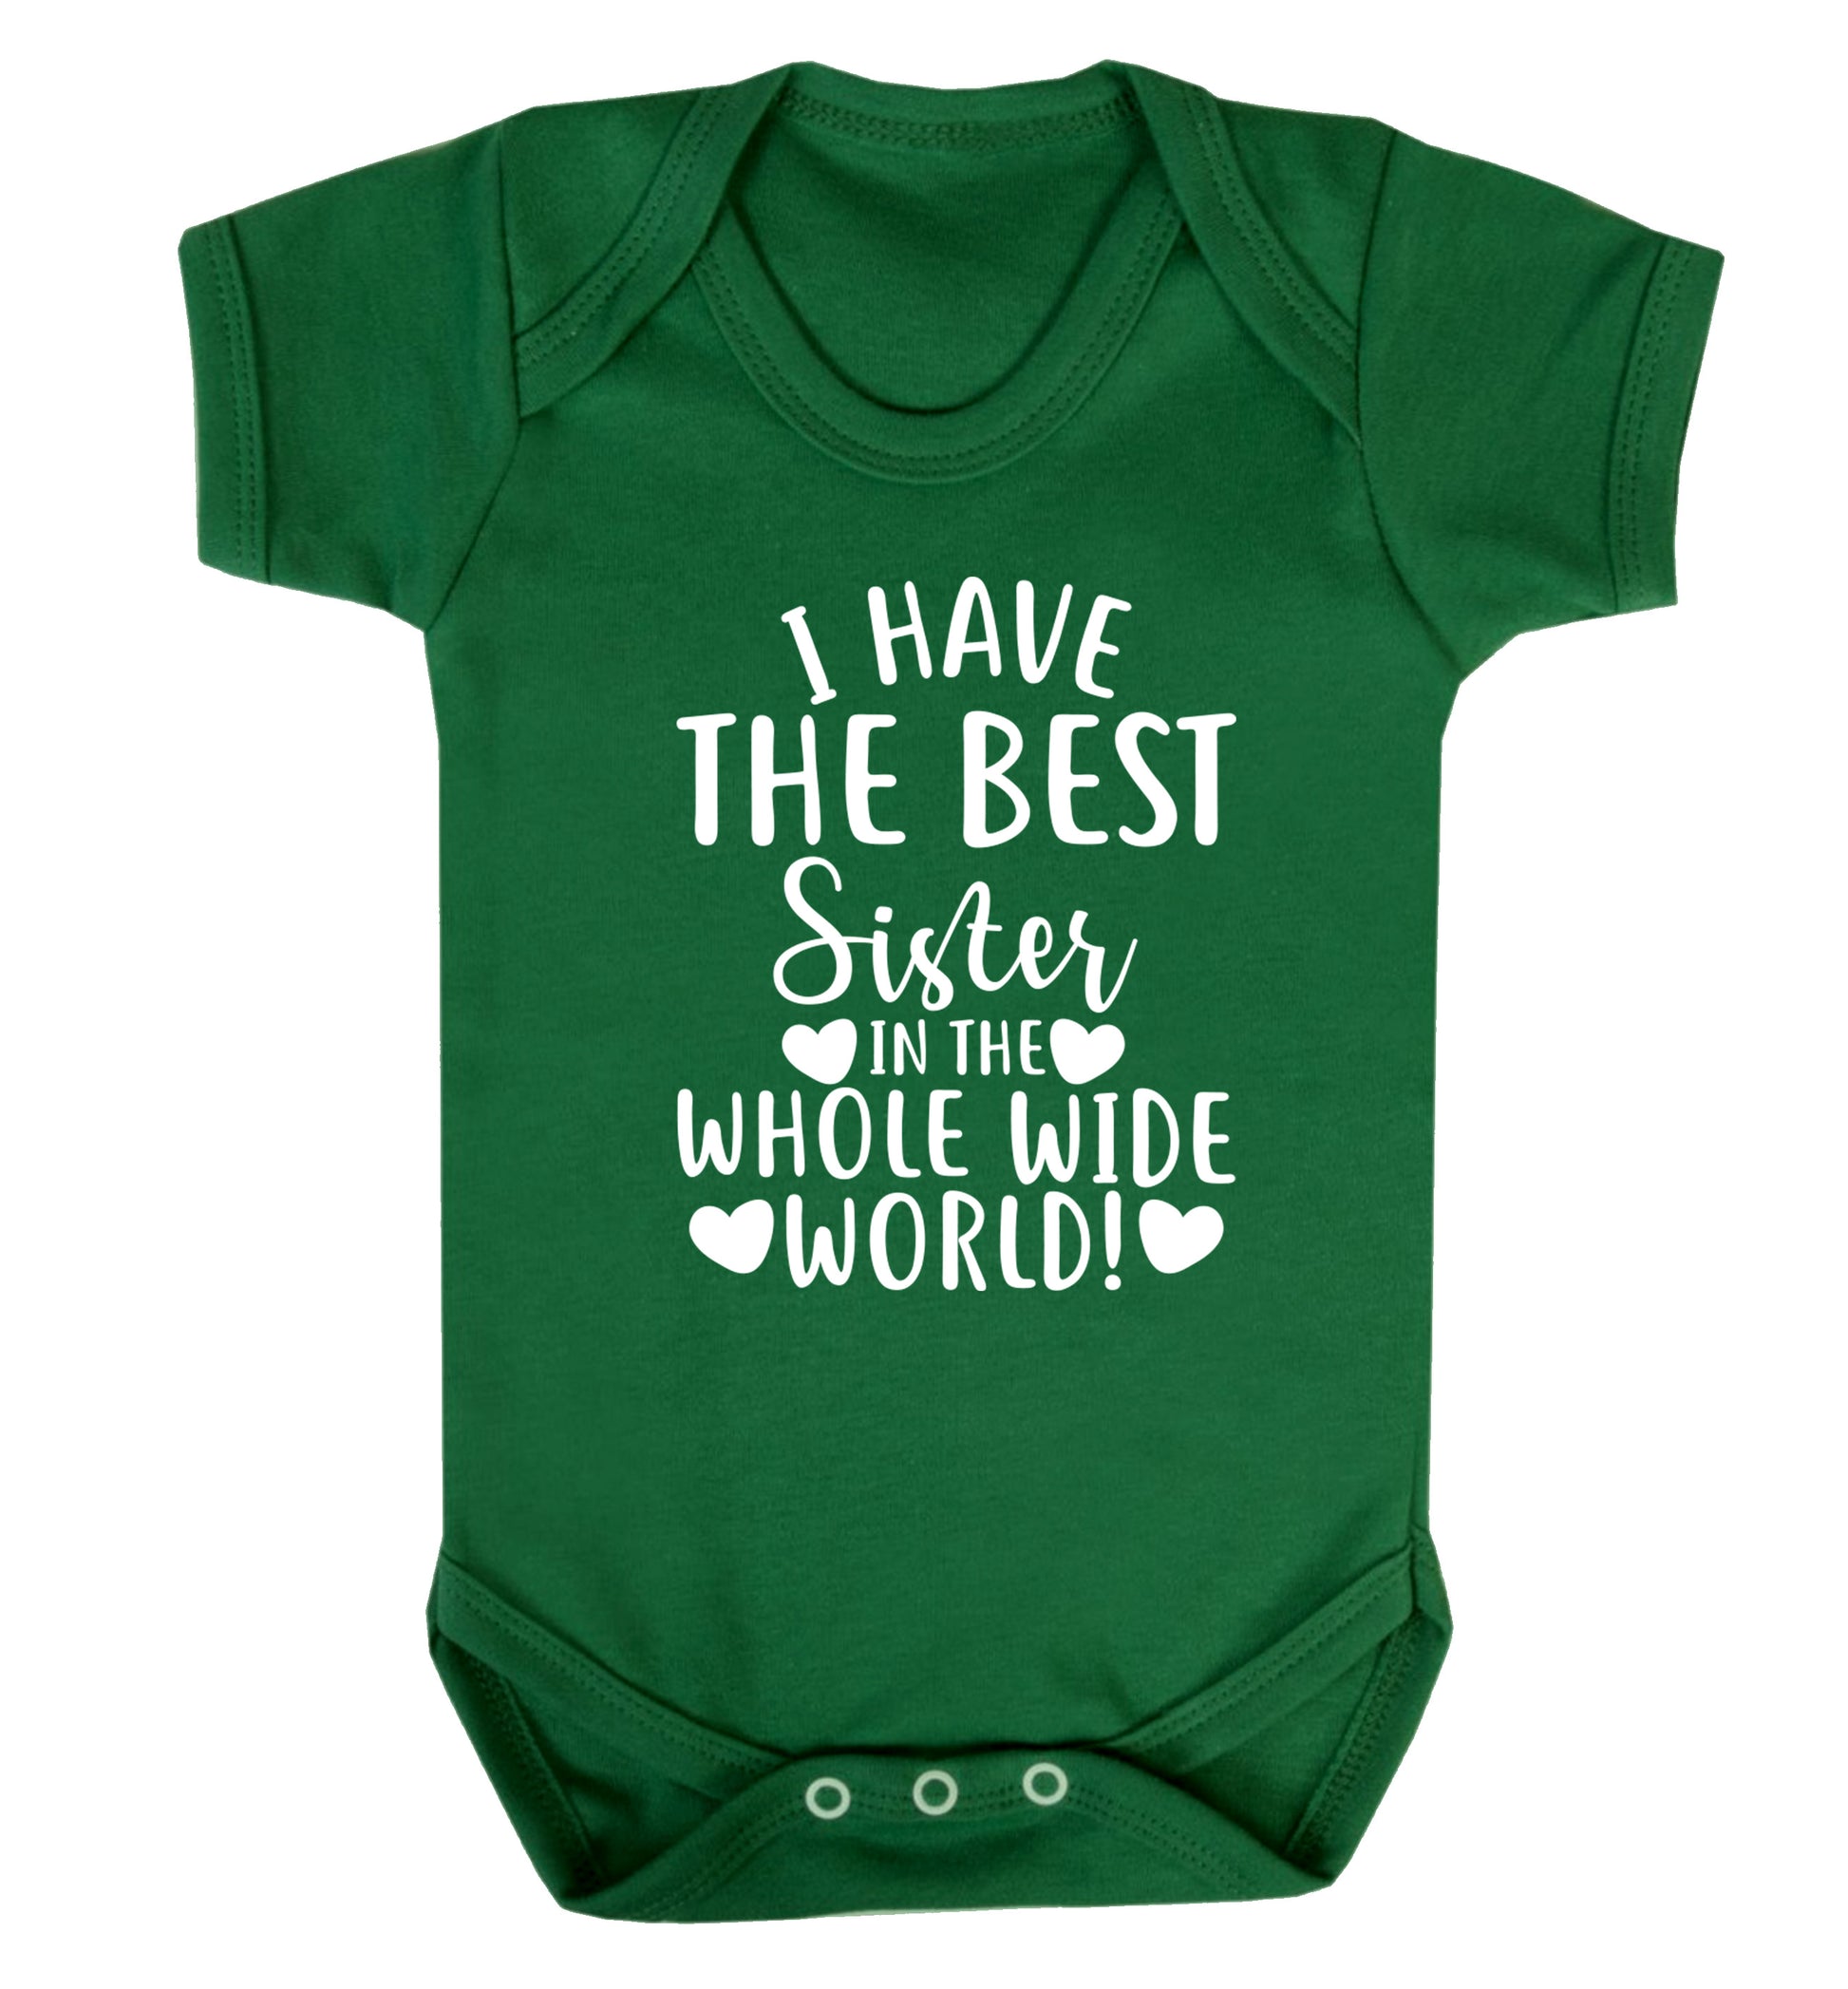 I have the best sister in the whole wide world! Baby Vest green 18-24 months